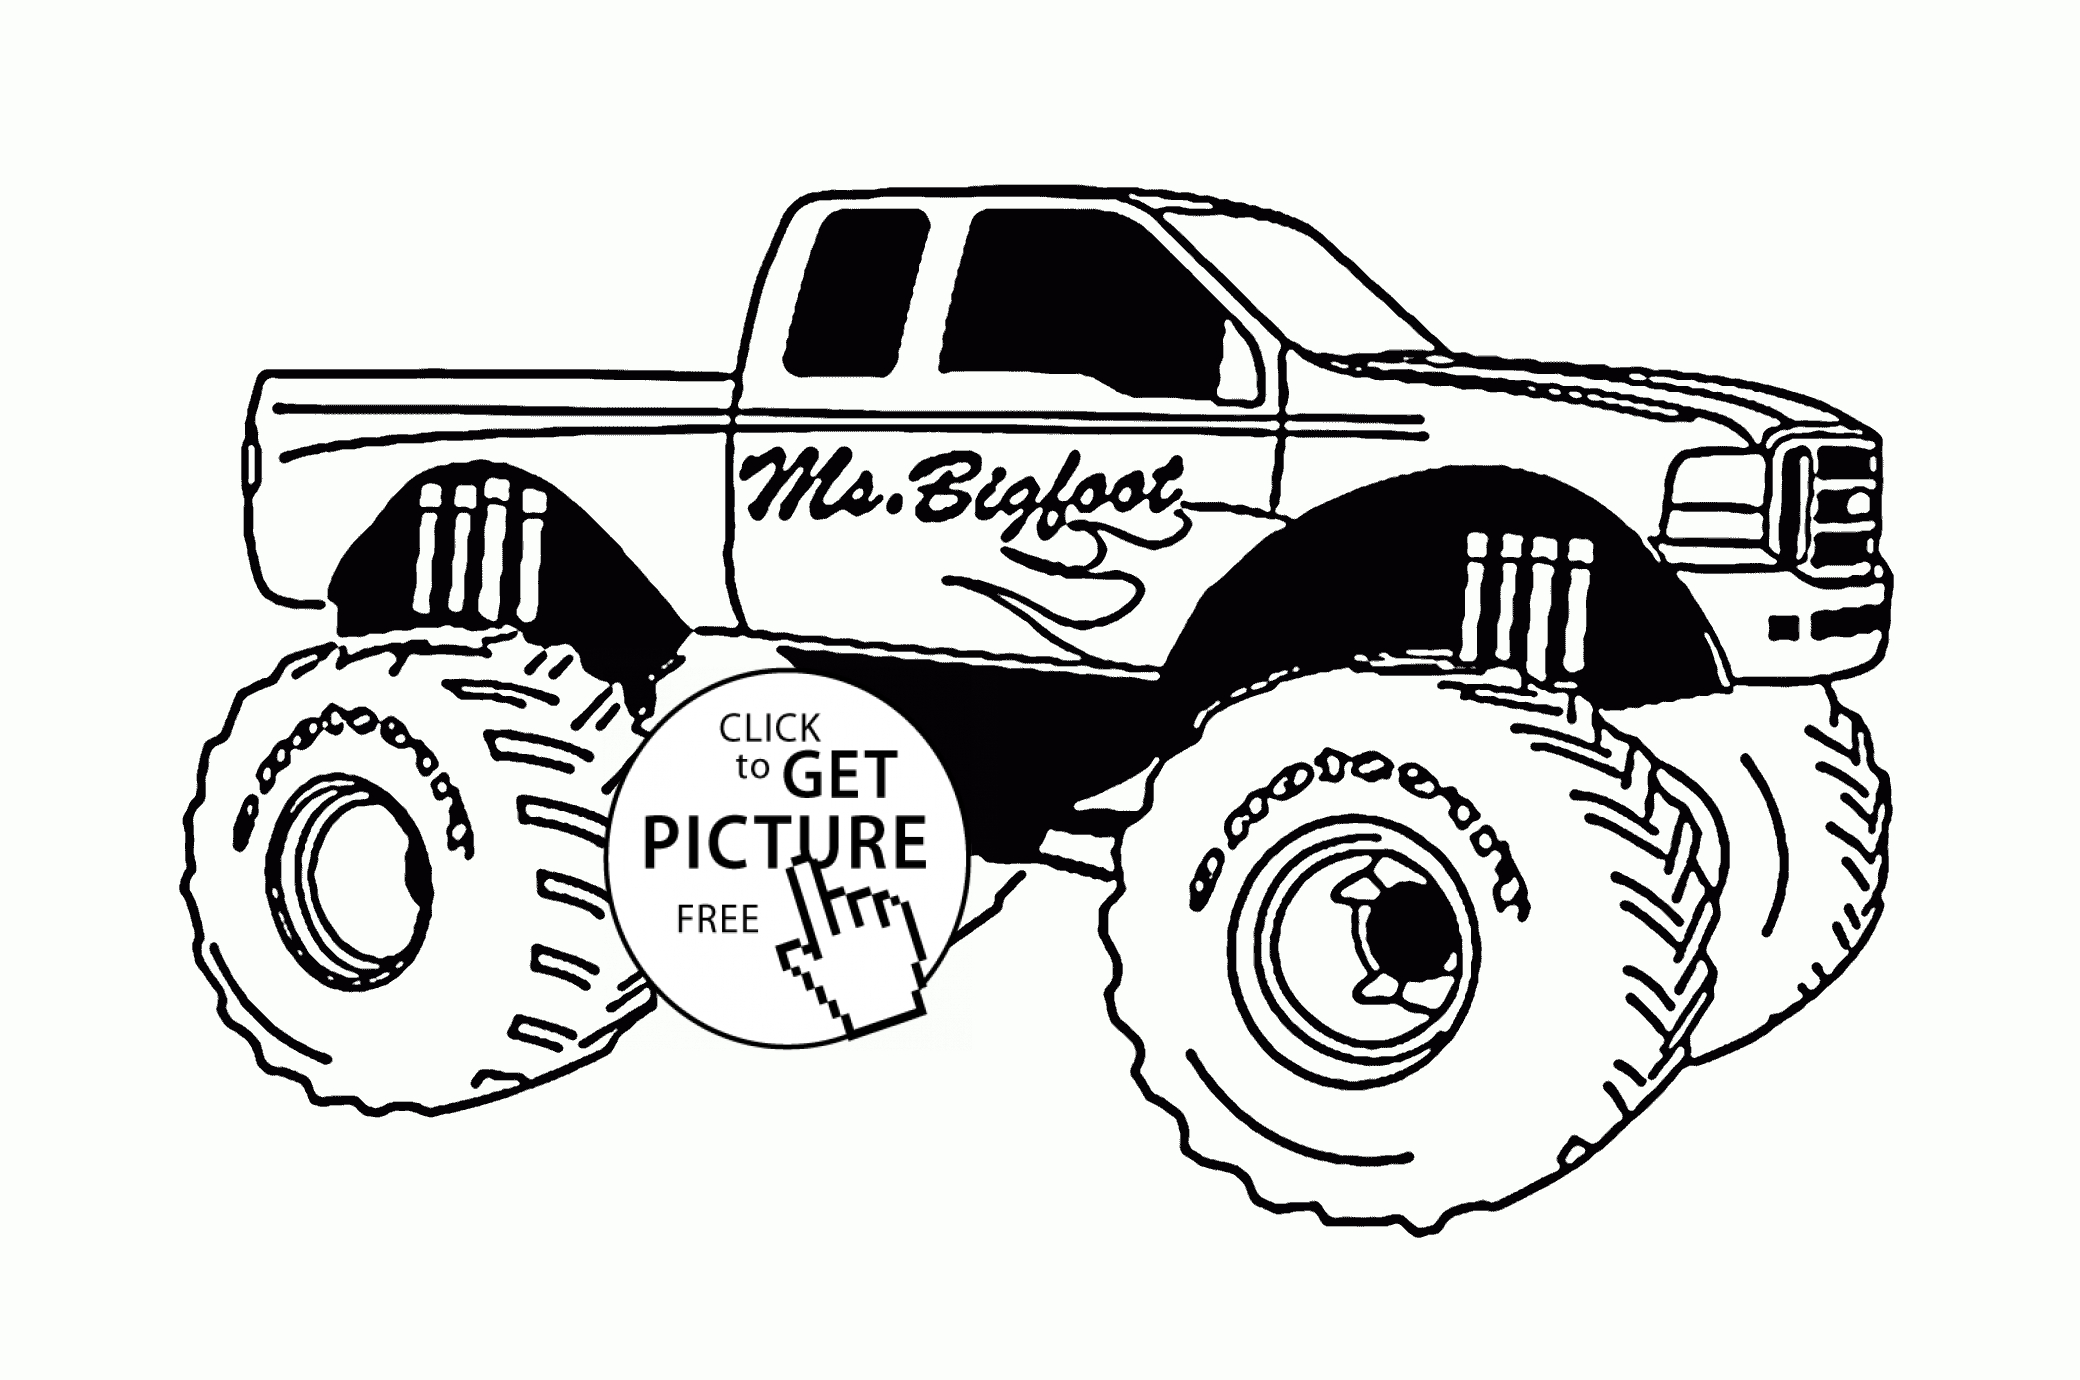 Monster Truck Coloring Pages Mr Bigfoot Monster Truck Coloring Page For Kids Transportation